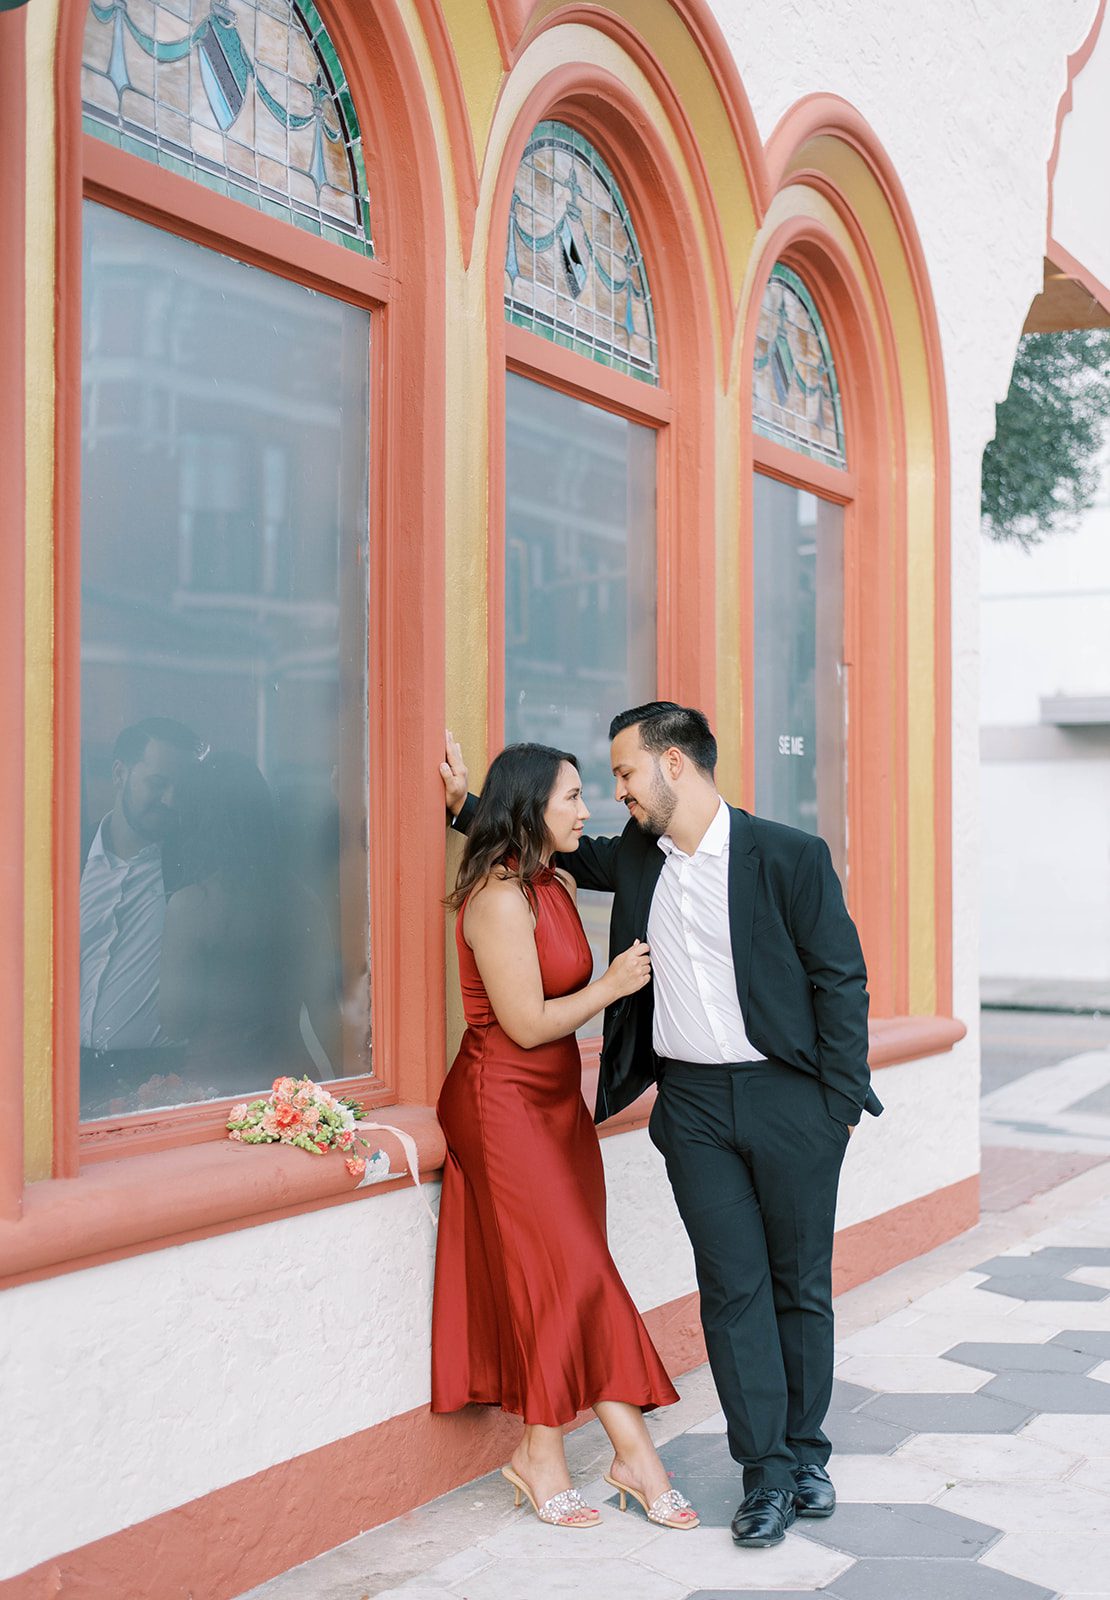 Ybor City engagement session with man in black suit and no tie leaning against a wall with a hand in his pocket over his fiance as her back is against the wall and she is holding his suit coat, with stunning old glass window behind them